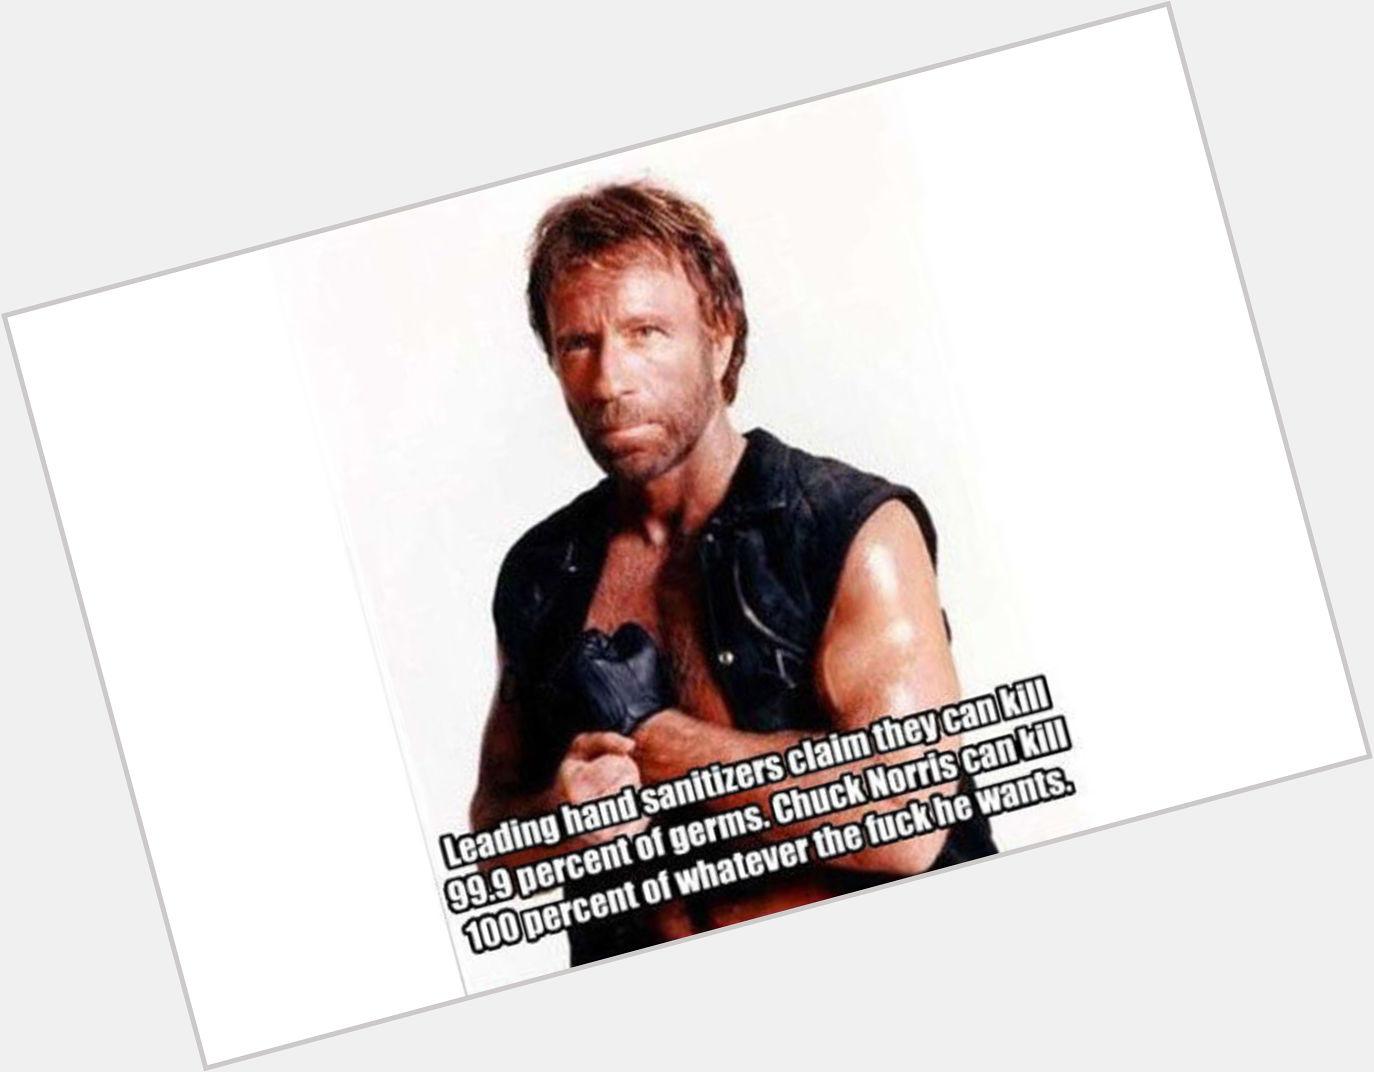 Happy Birthday Chuck Norris, the only person immune to Covid-19 